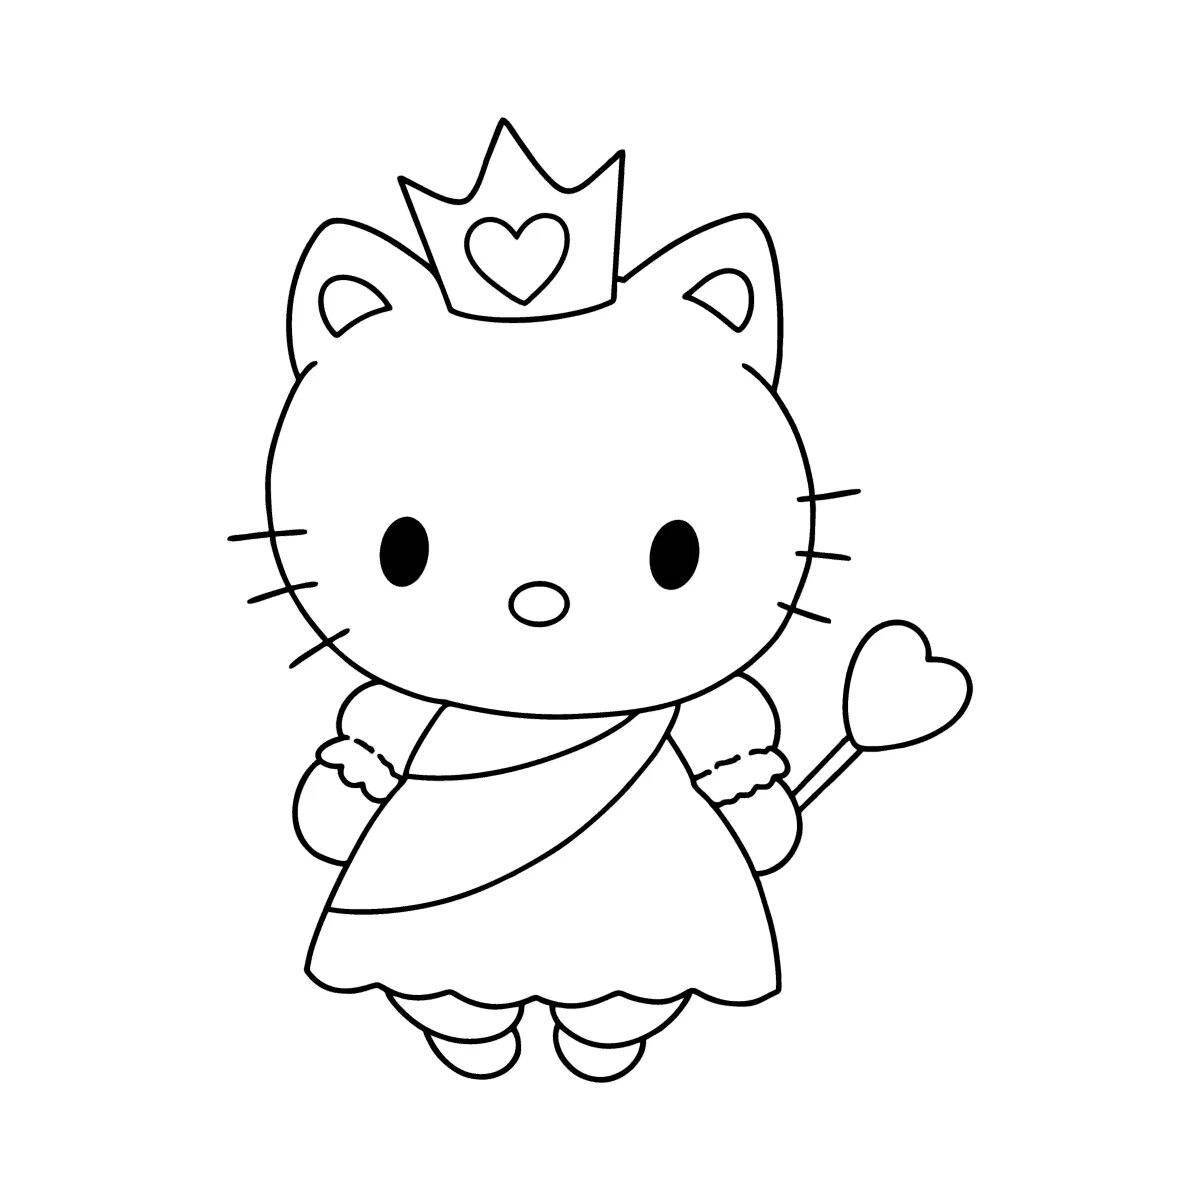 Outstanding hello kitty kuromi coloring book for girls